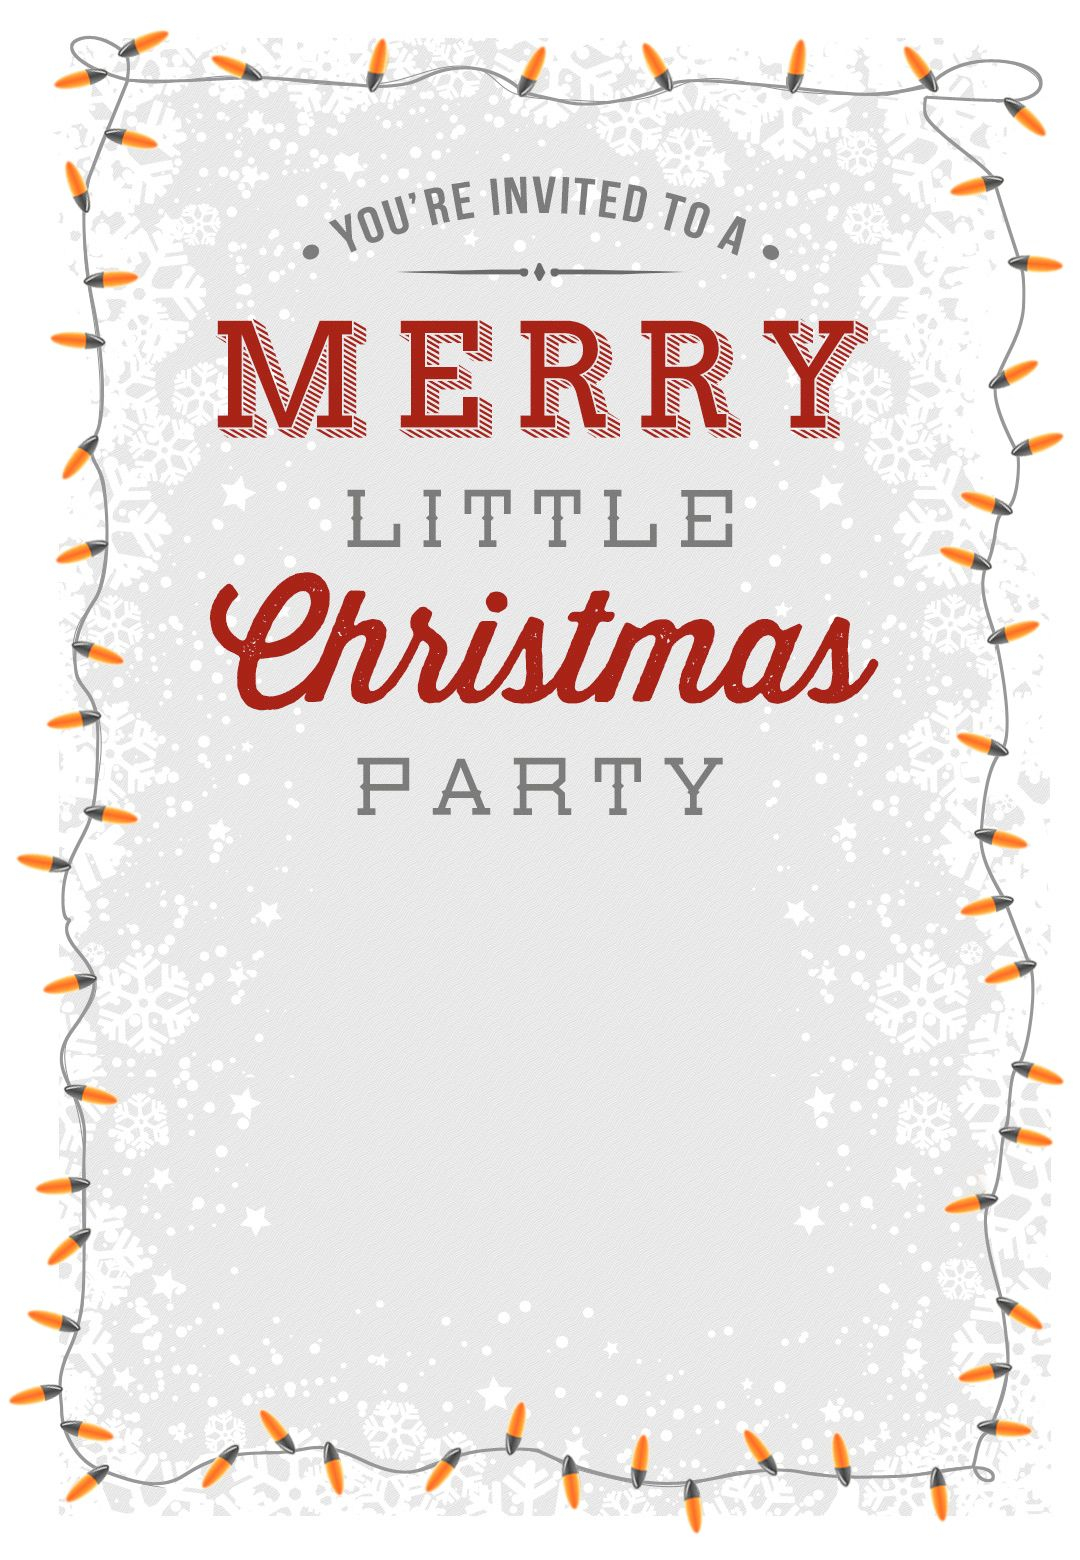 A Merry Little Party Free Printable Christmas Invitation Template inside measurements 1080 X 1560